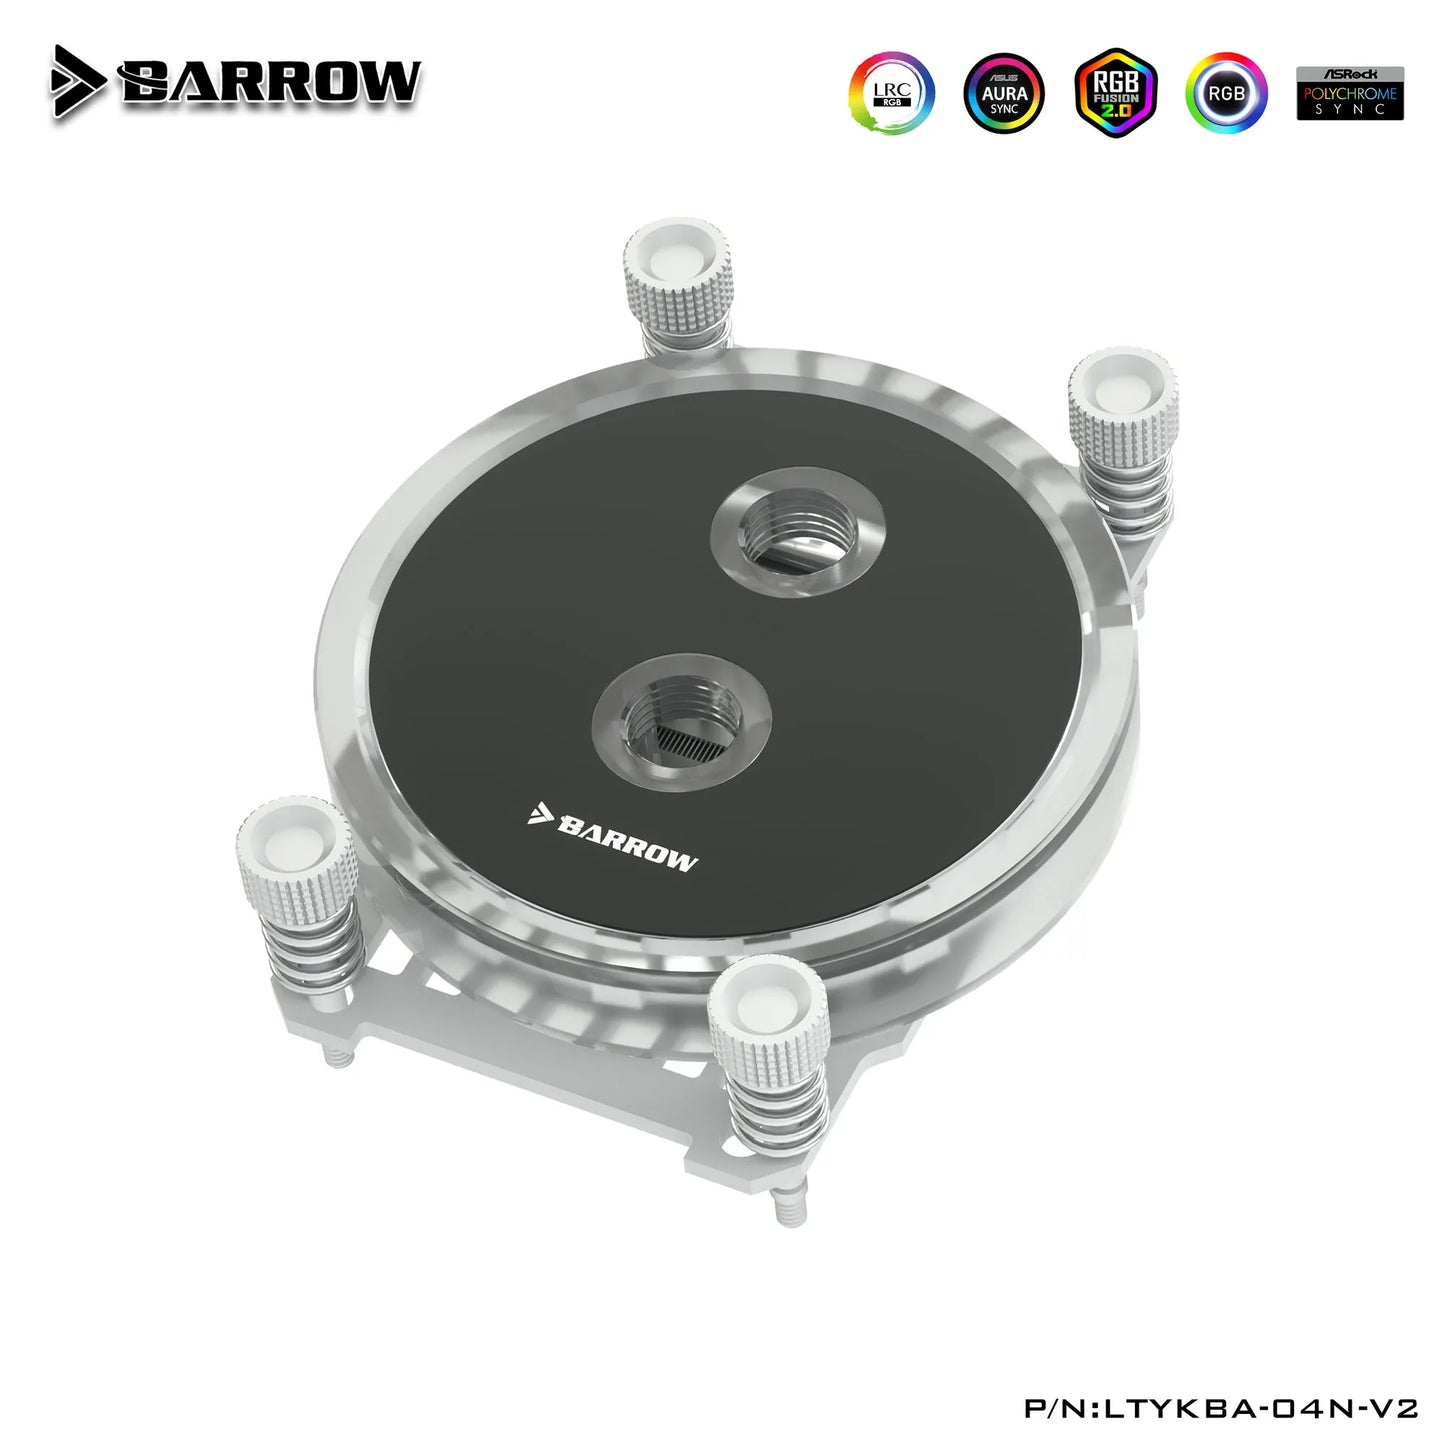 Barrow Brilliant Edition CPU Block, For Intel and AMD CPU, LRC 2.0 Acrylic Micro Waterway Water Cooling Cooler, LTYKB-04I LTYKBA-04N-V2